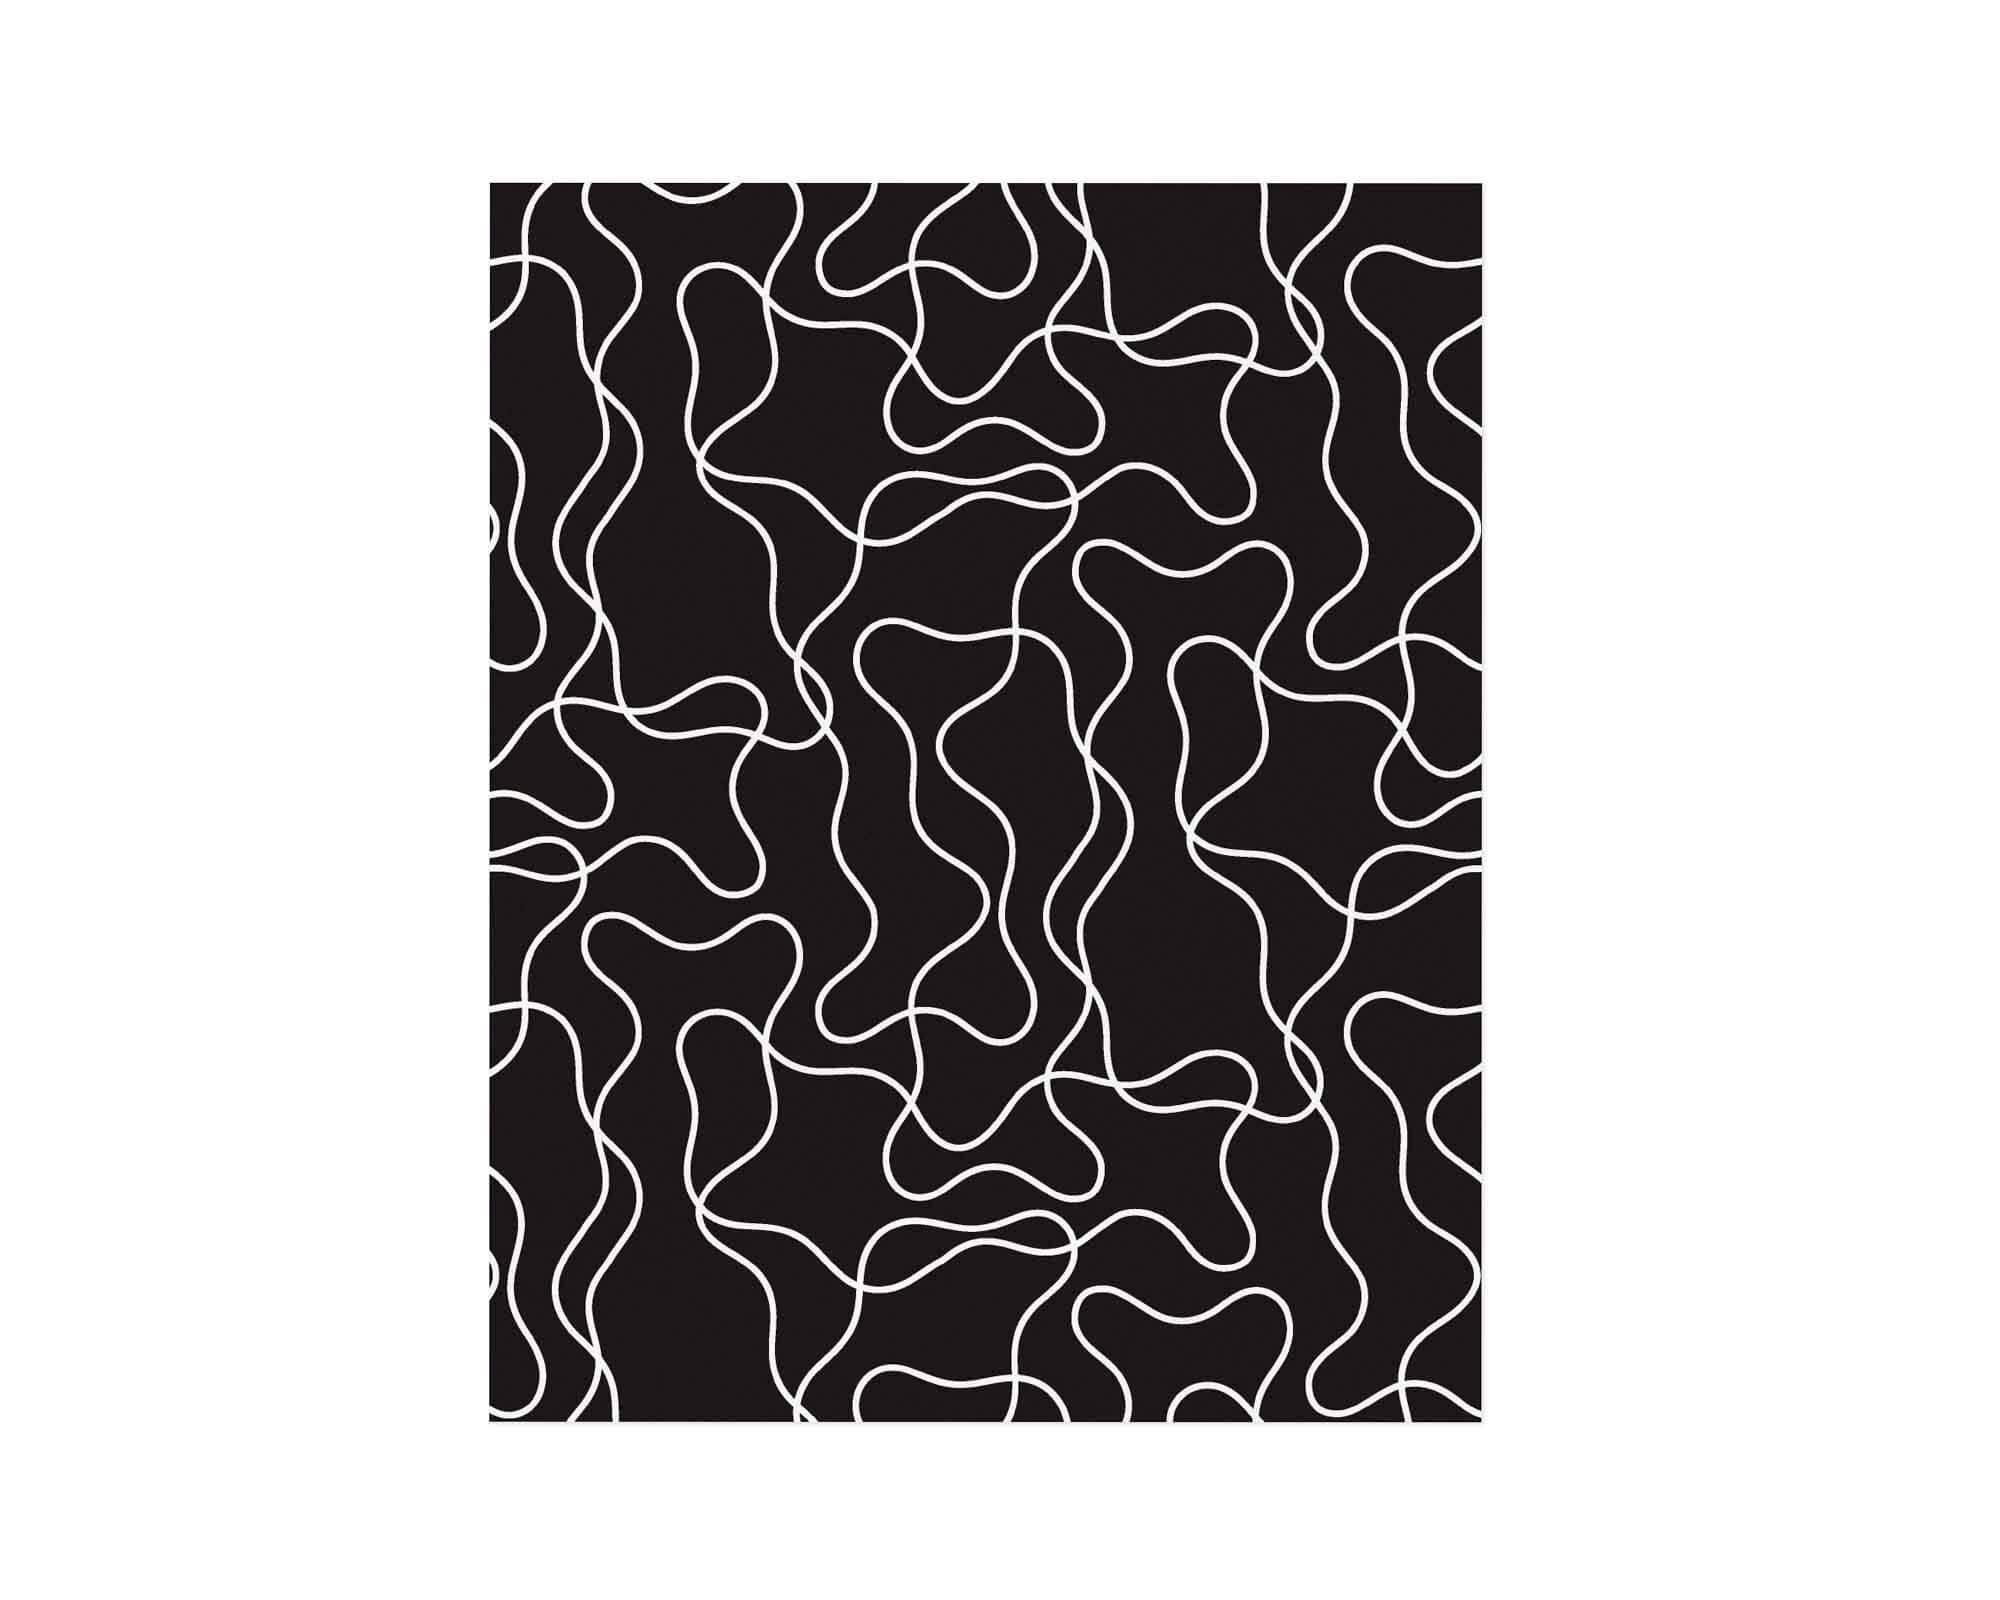 "Magic Squiggle" graphic black and white squiggle pattern archival giclée modern art print. Made in USA by My Darlin' @mydarlin_bk